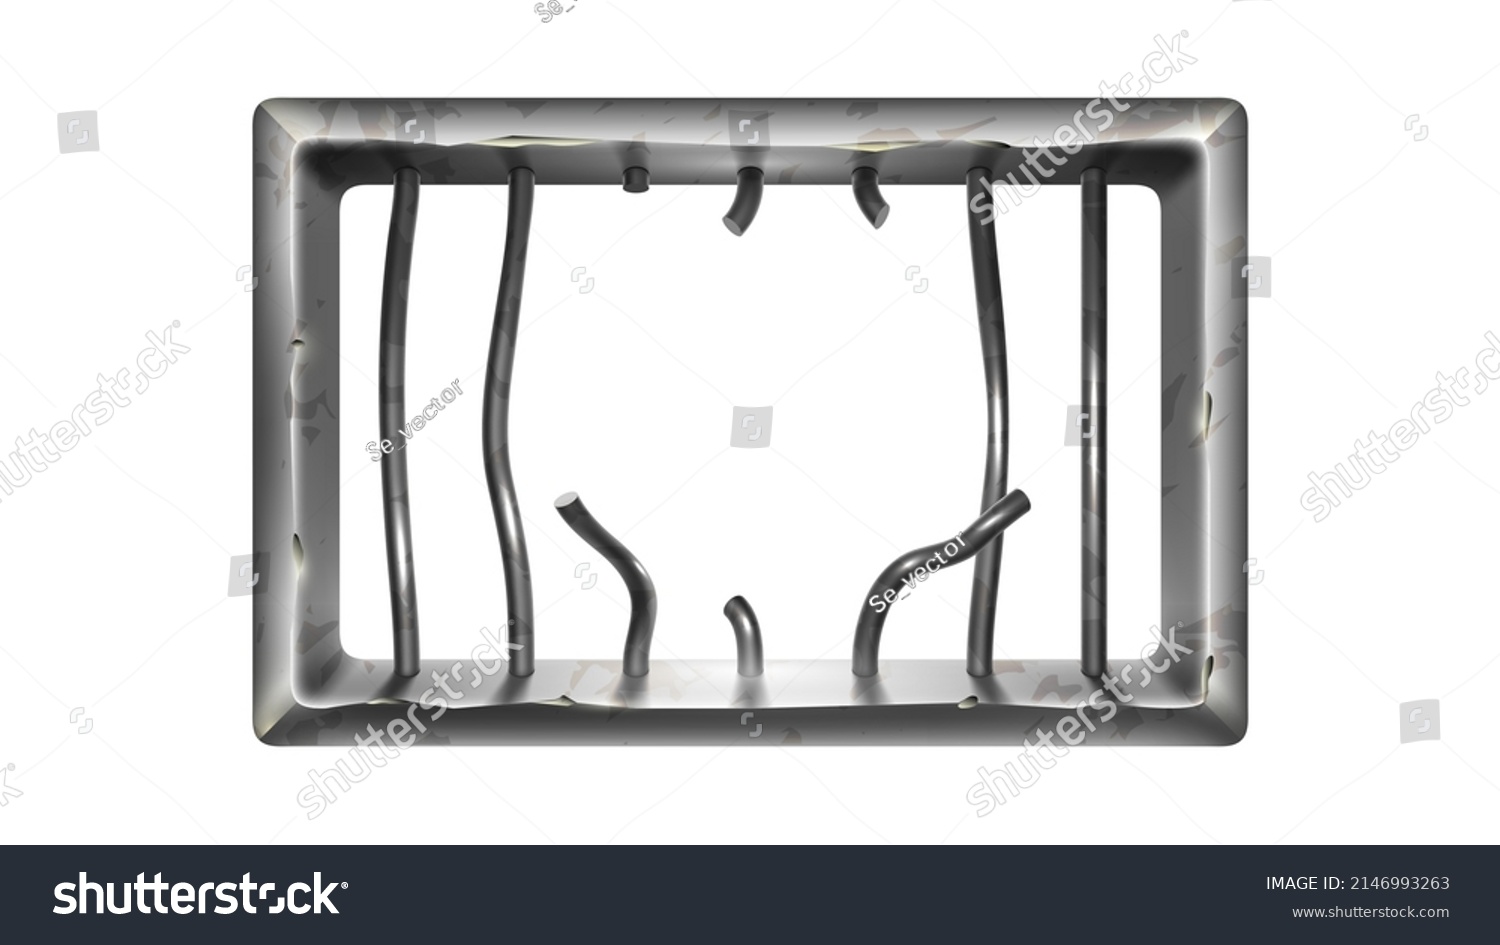 Prison Bar With Broken Metallic Secure Grid Vector. Prisoner Escaped From Cage Through Steel Window Prison Bar. Criminal Iron Lattice, Security Equipment Template Realistic 3d Illustration #2146993263